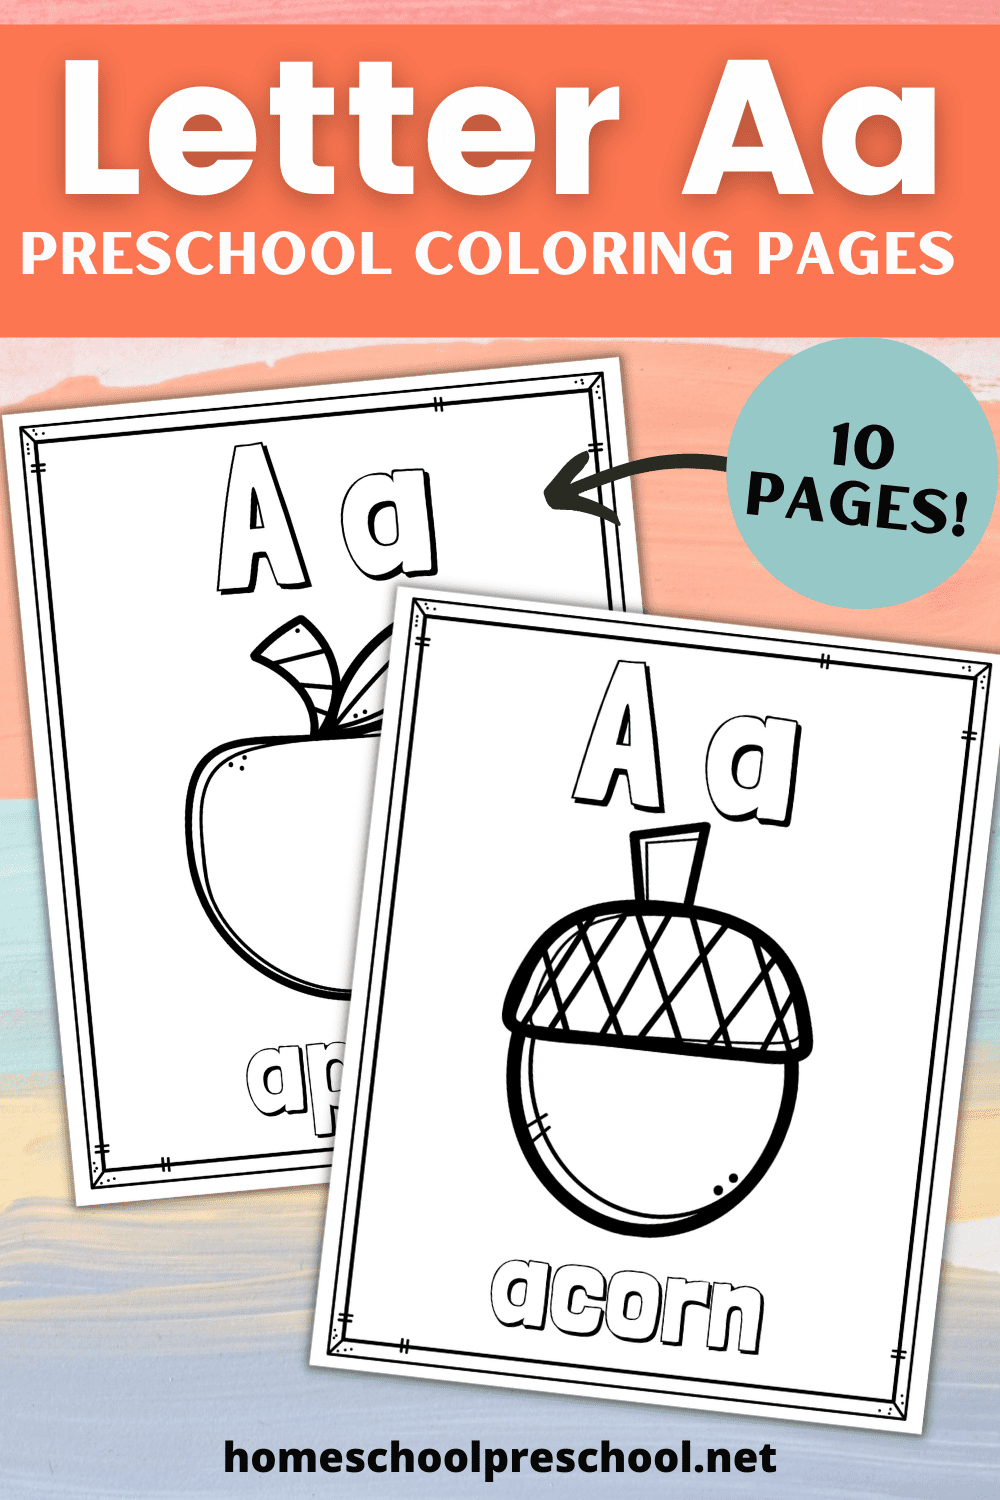 Free letter a coloring worksheets to print and color